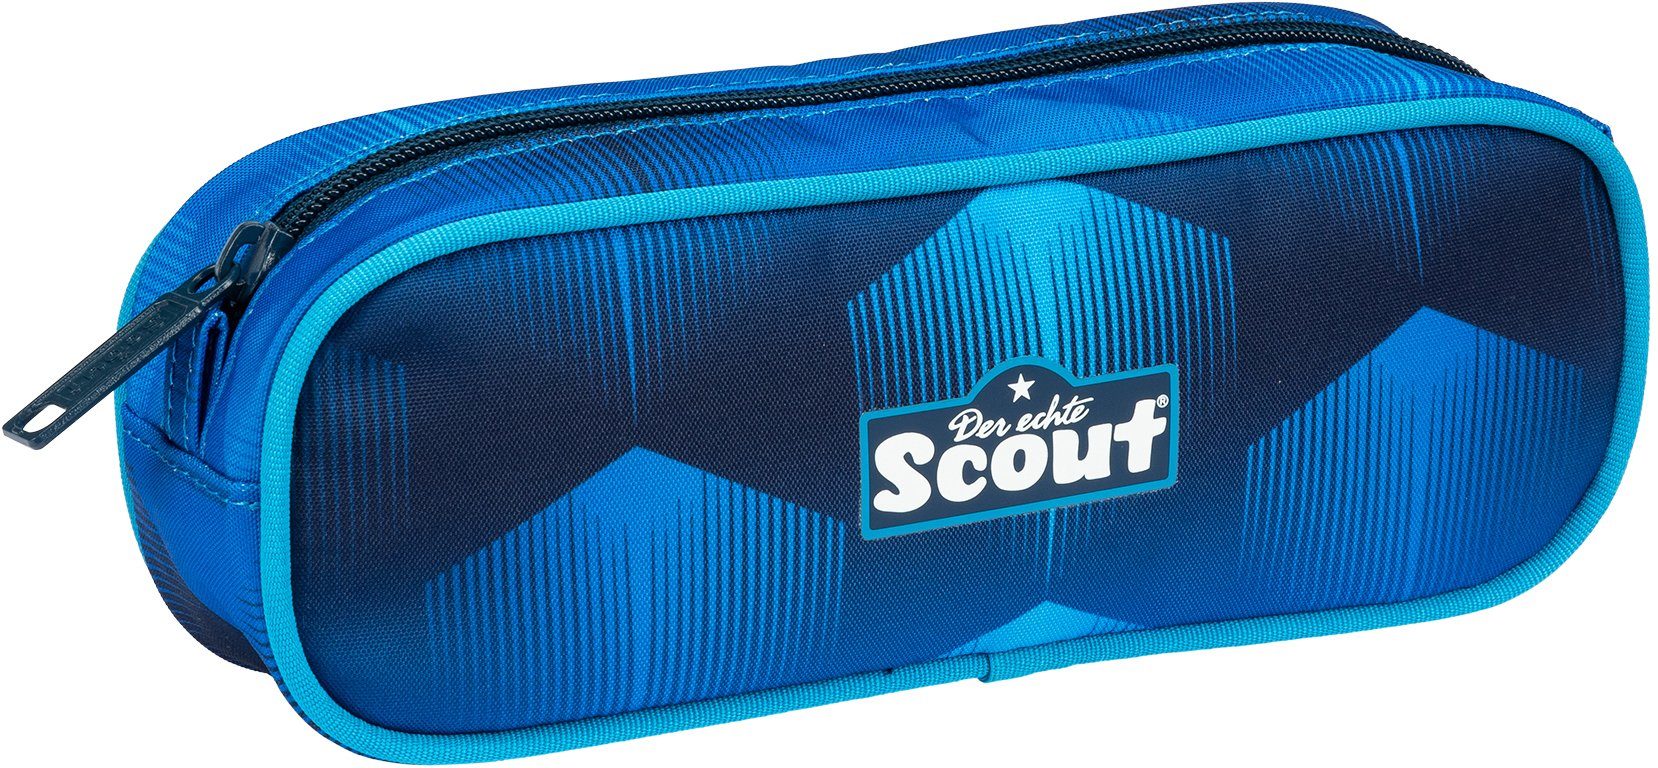 Scout Schulranzen Sunny II Material LED-Licht mit (Set), 3 Snaps; enthält Light, Freaks recyceltes & Safety Funny Funny